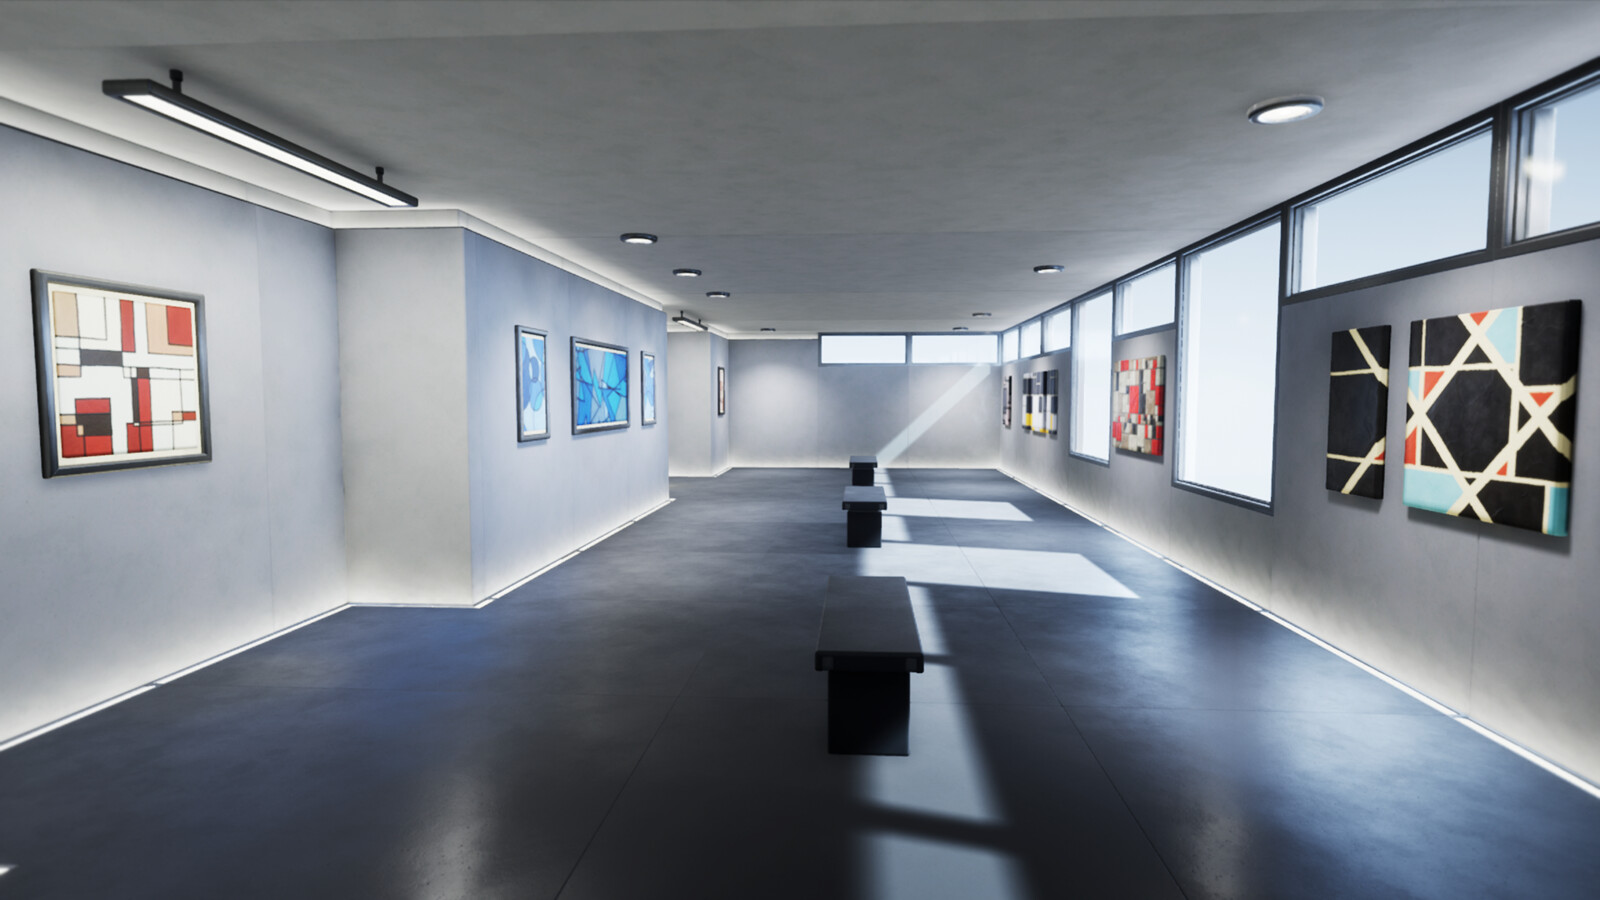 The gallery space in Unreal